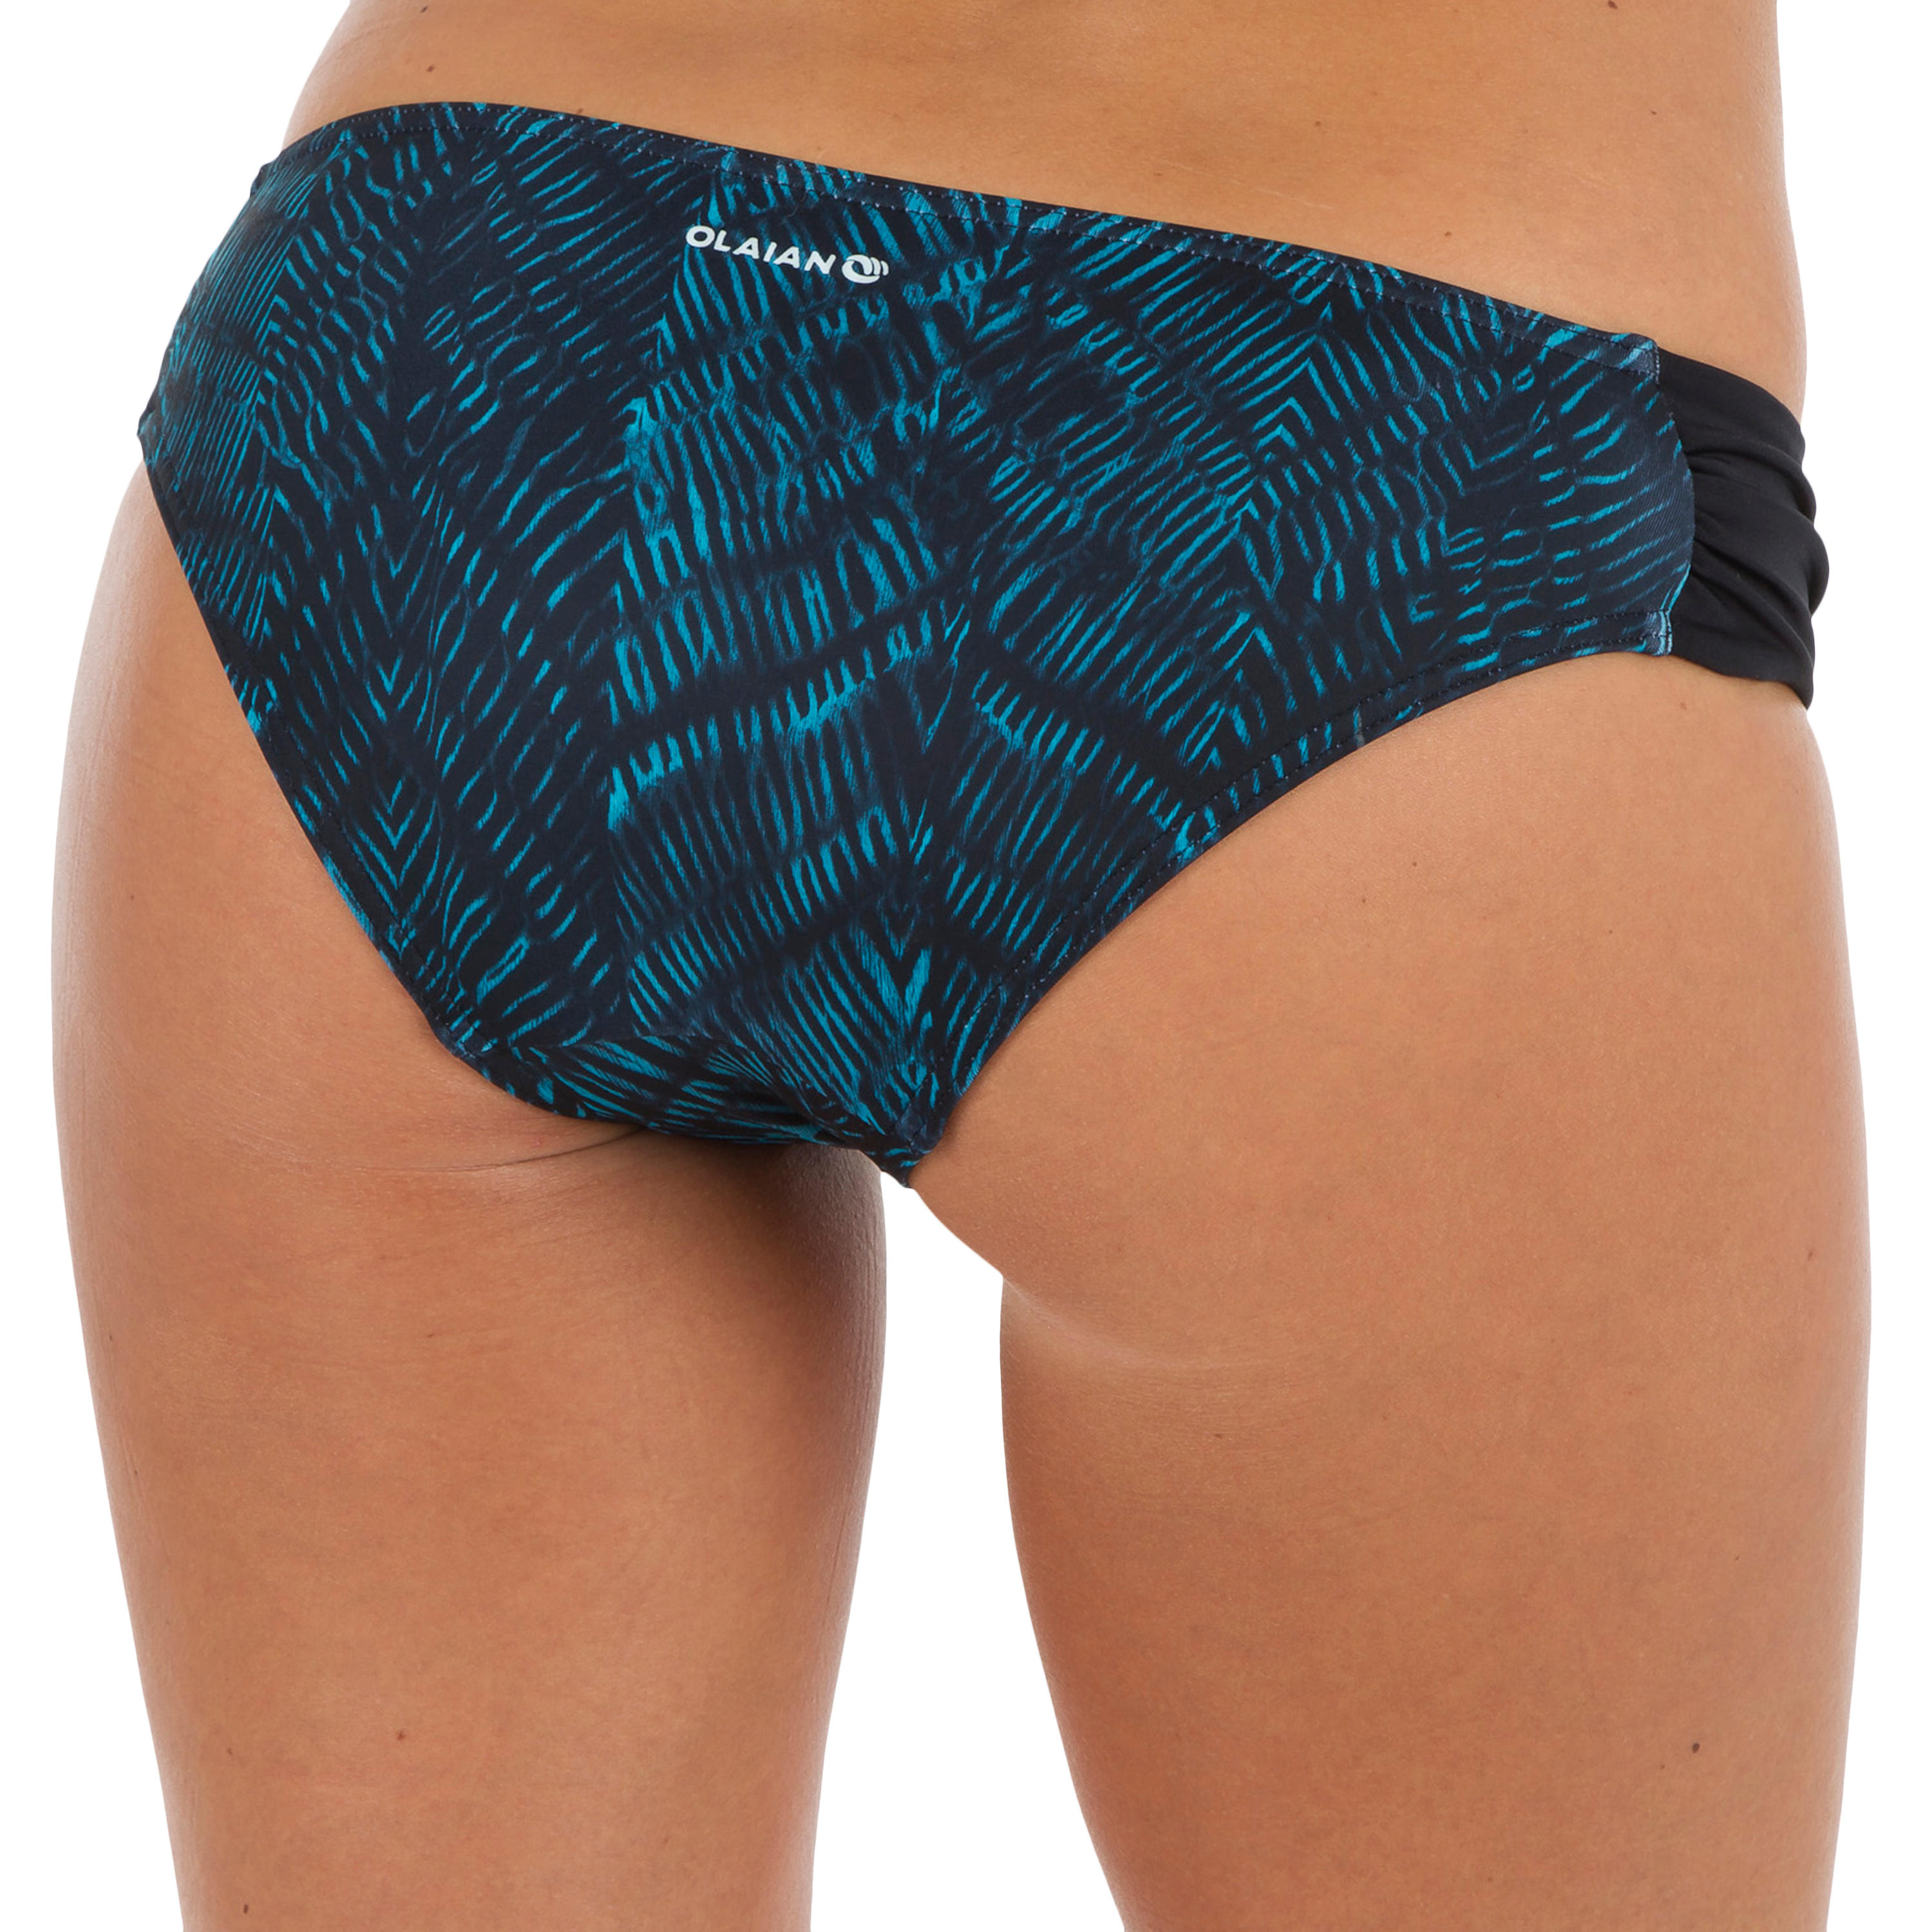 Niki Women's Surfing Swimsuit Bottoms with Gathering at the Sides - Shibo Blue 3/7